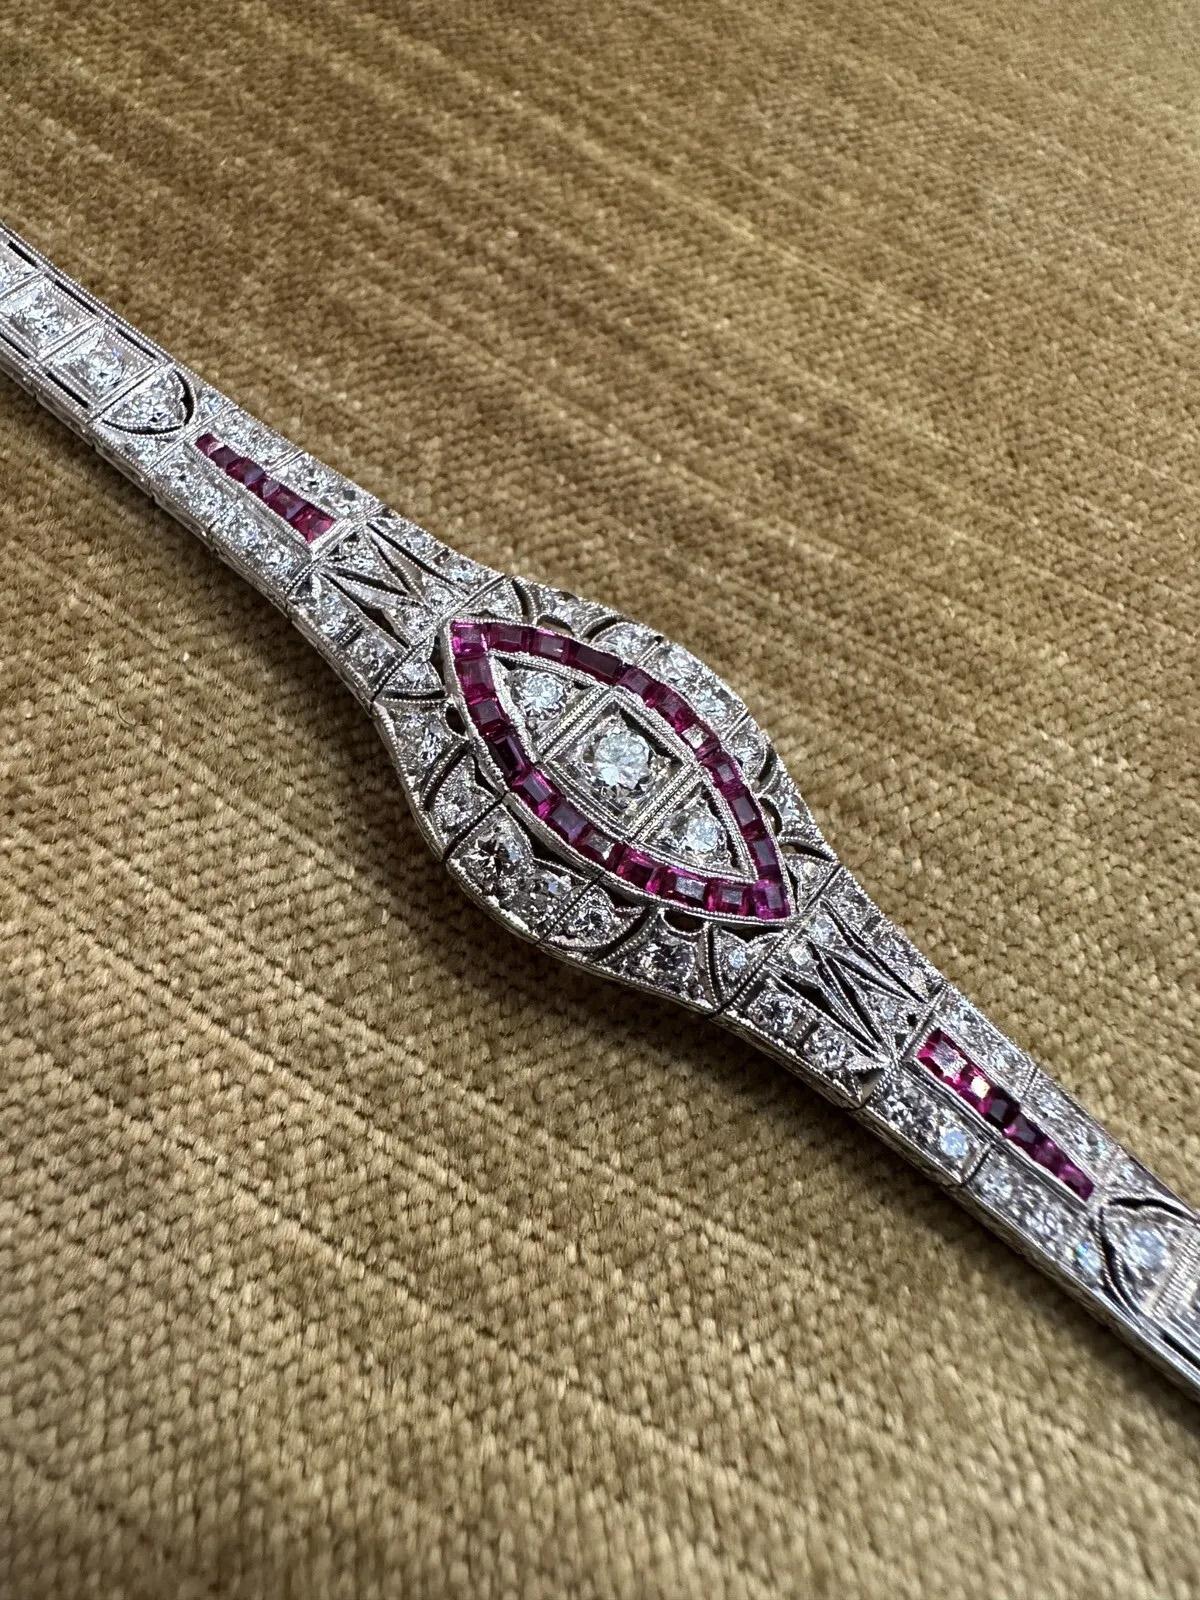 Art Deco Ruby and Diamond Bracelet in Platinum 

Art Deco Ruby and Diamond Bracelet features Old European and Mine Cut Diamonds accented by Rubies set in Platinum with Milgrain edges. Bracelet is secured by a tongue clasp with bar safety.

Bracelet